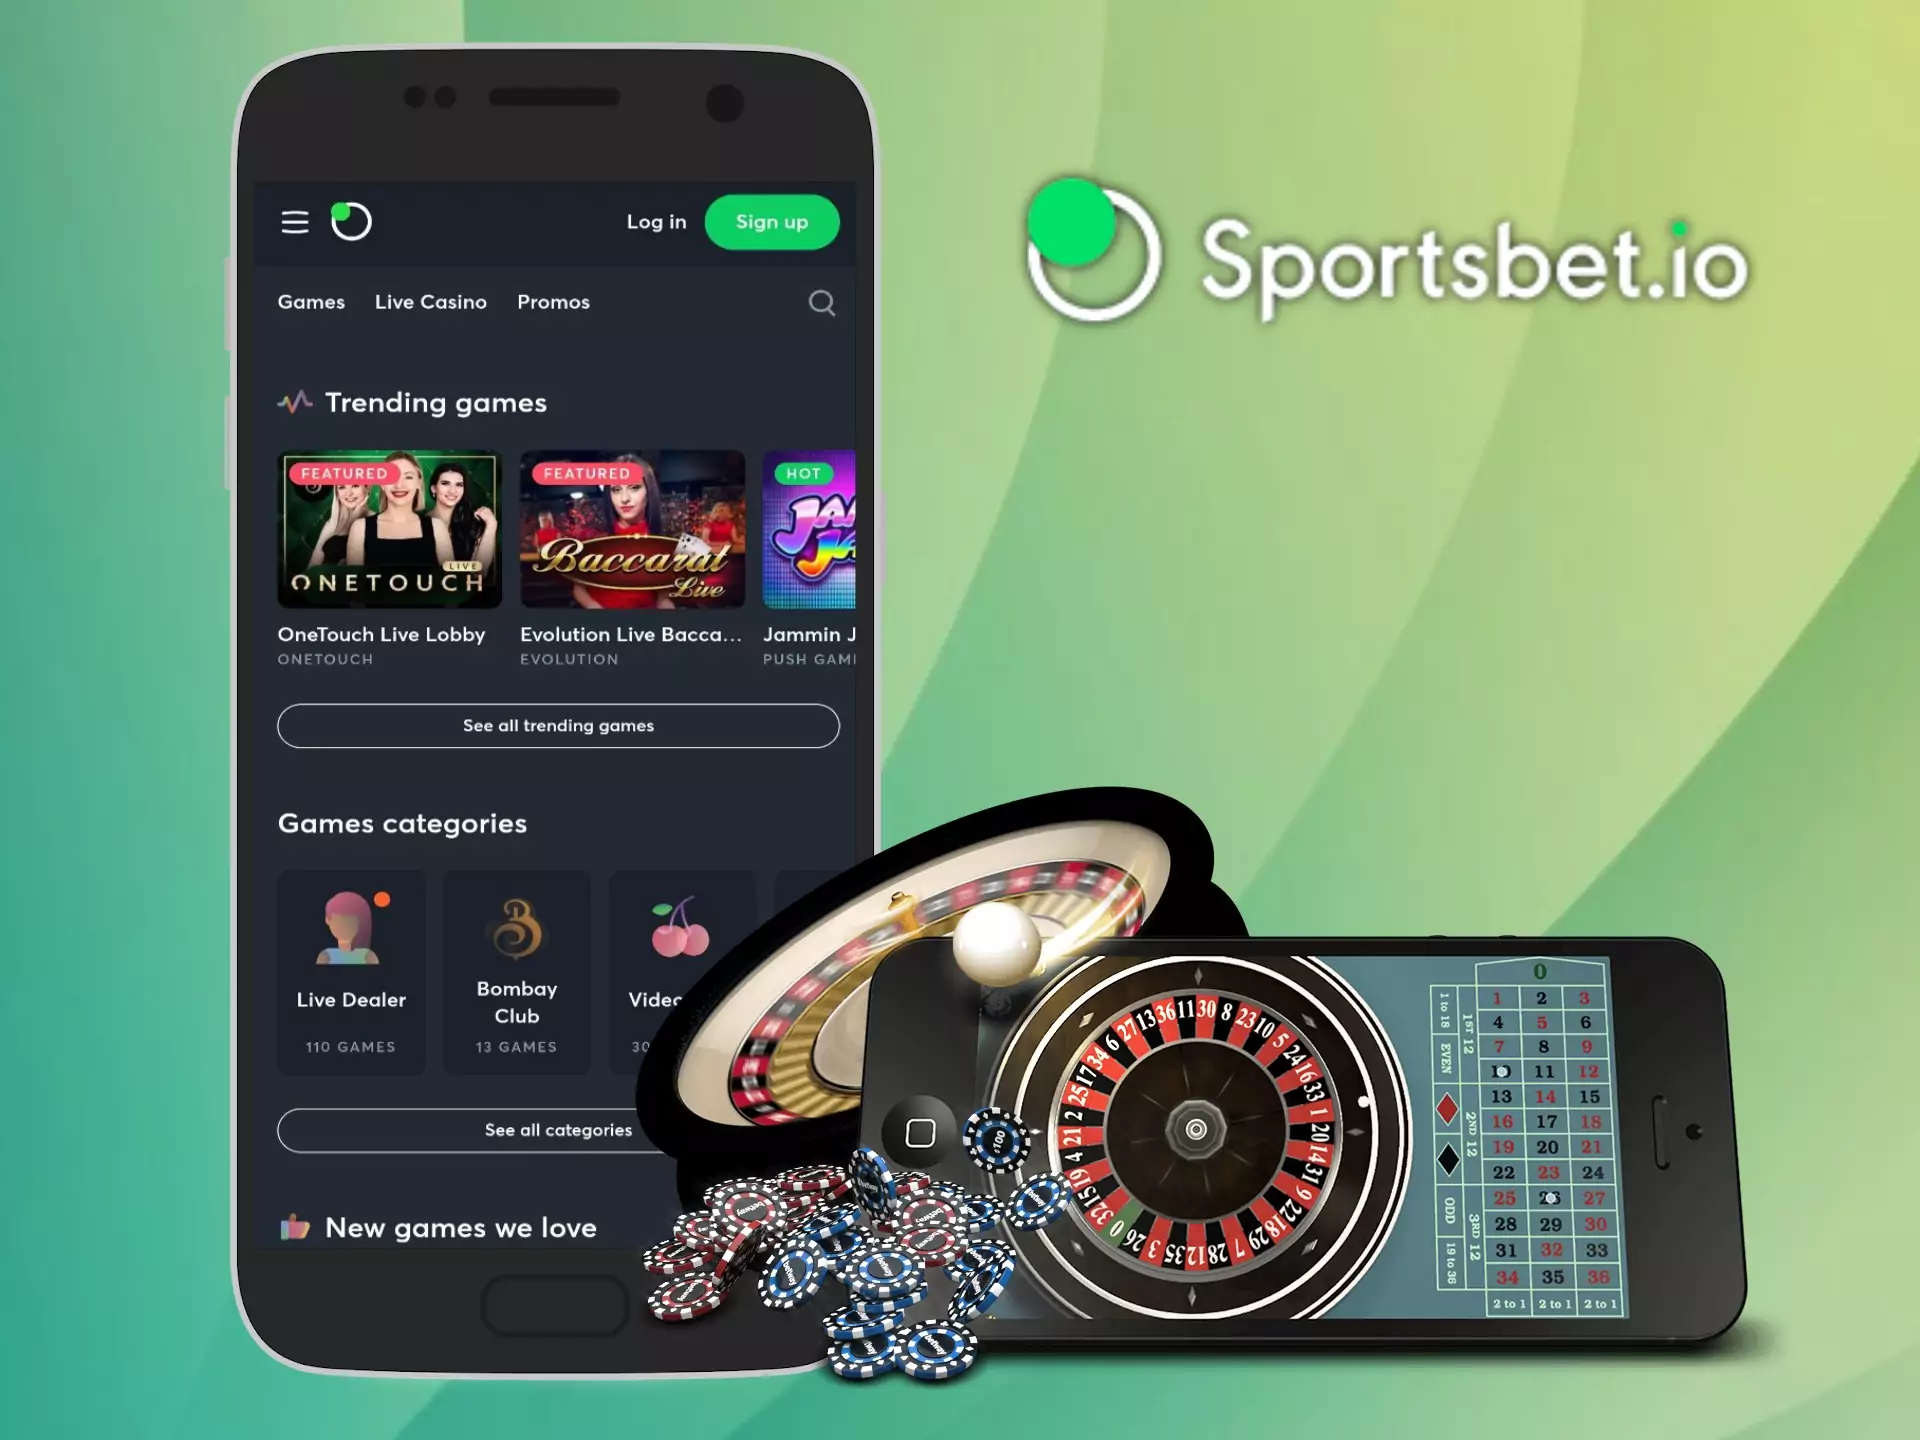 Sportsbet casino has a lot of slots and other games from well-known developers.